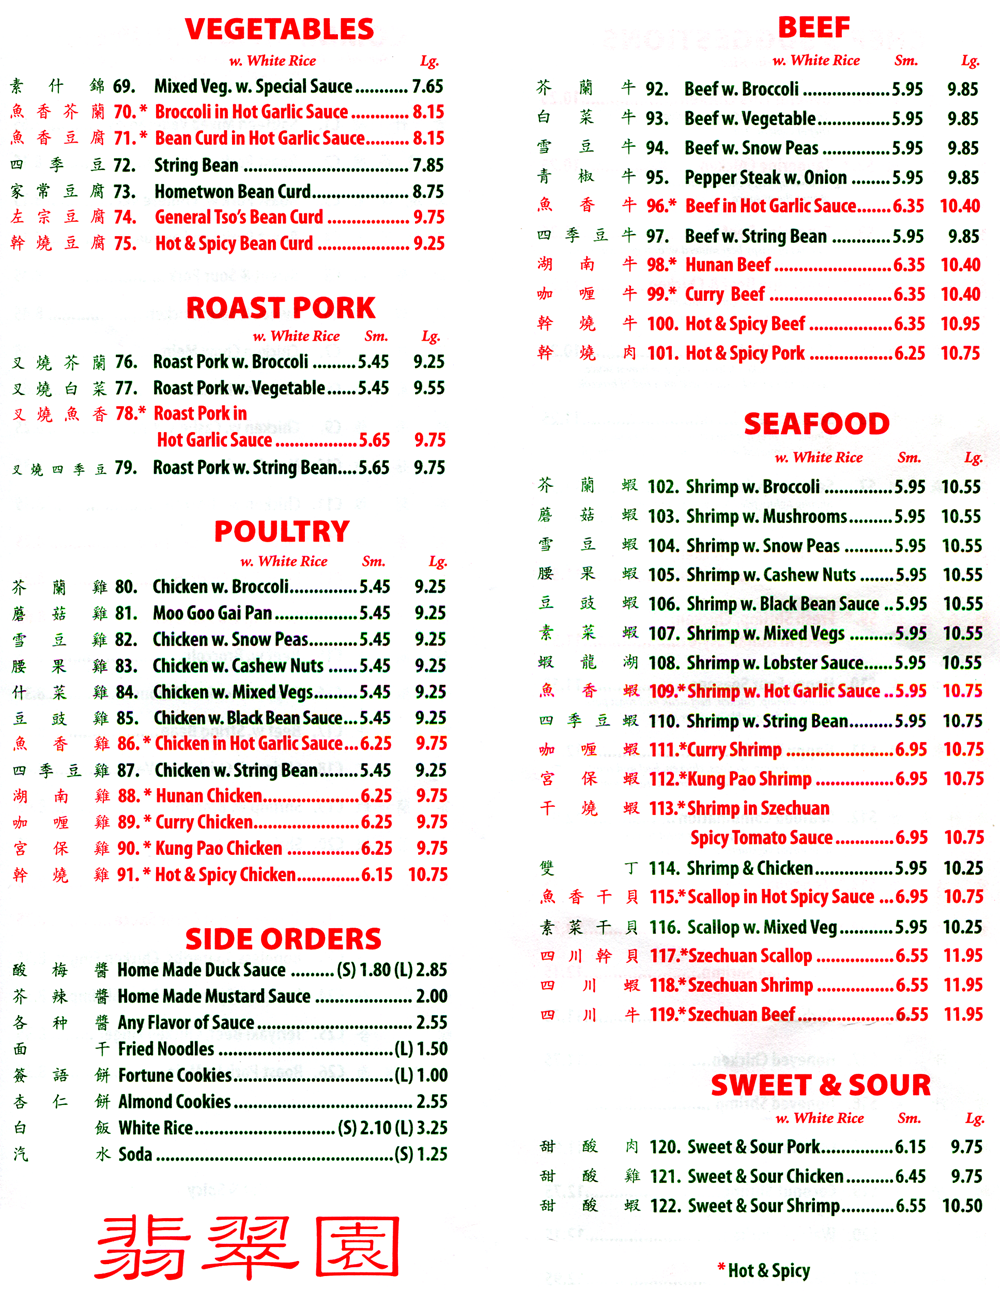 Vegetable, beef, pork, seafood, poultry, sweet and sour entrees plus side order options on Young Young's takeout menu